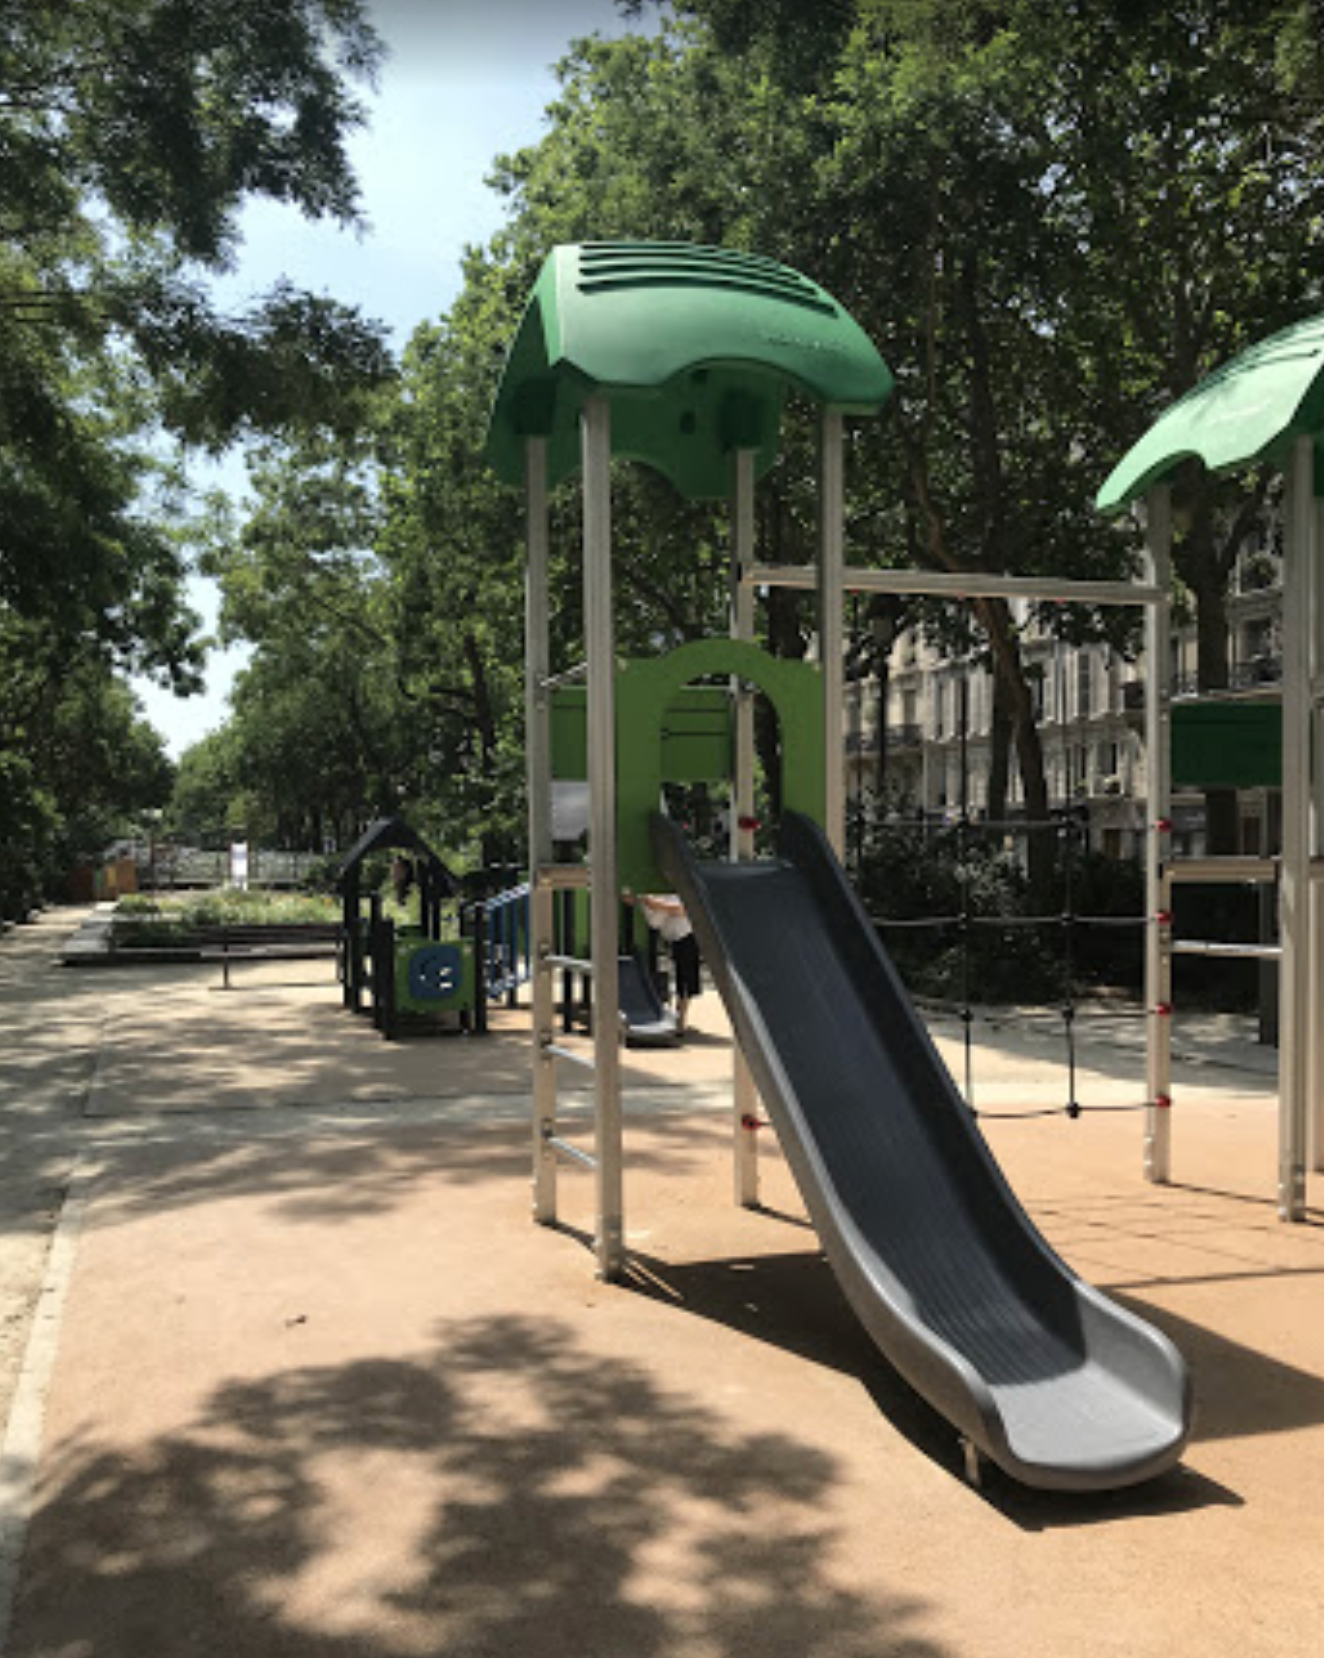 Playground in Jules Ferry square